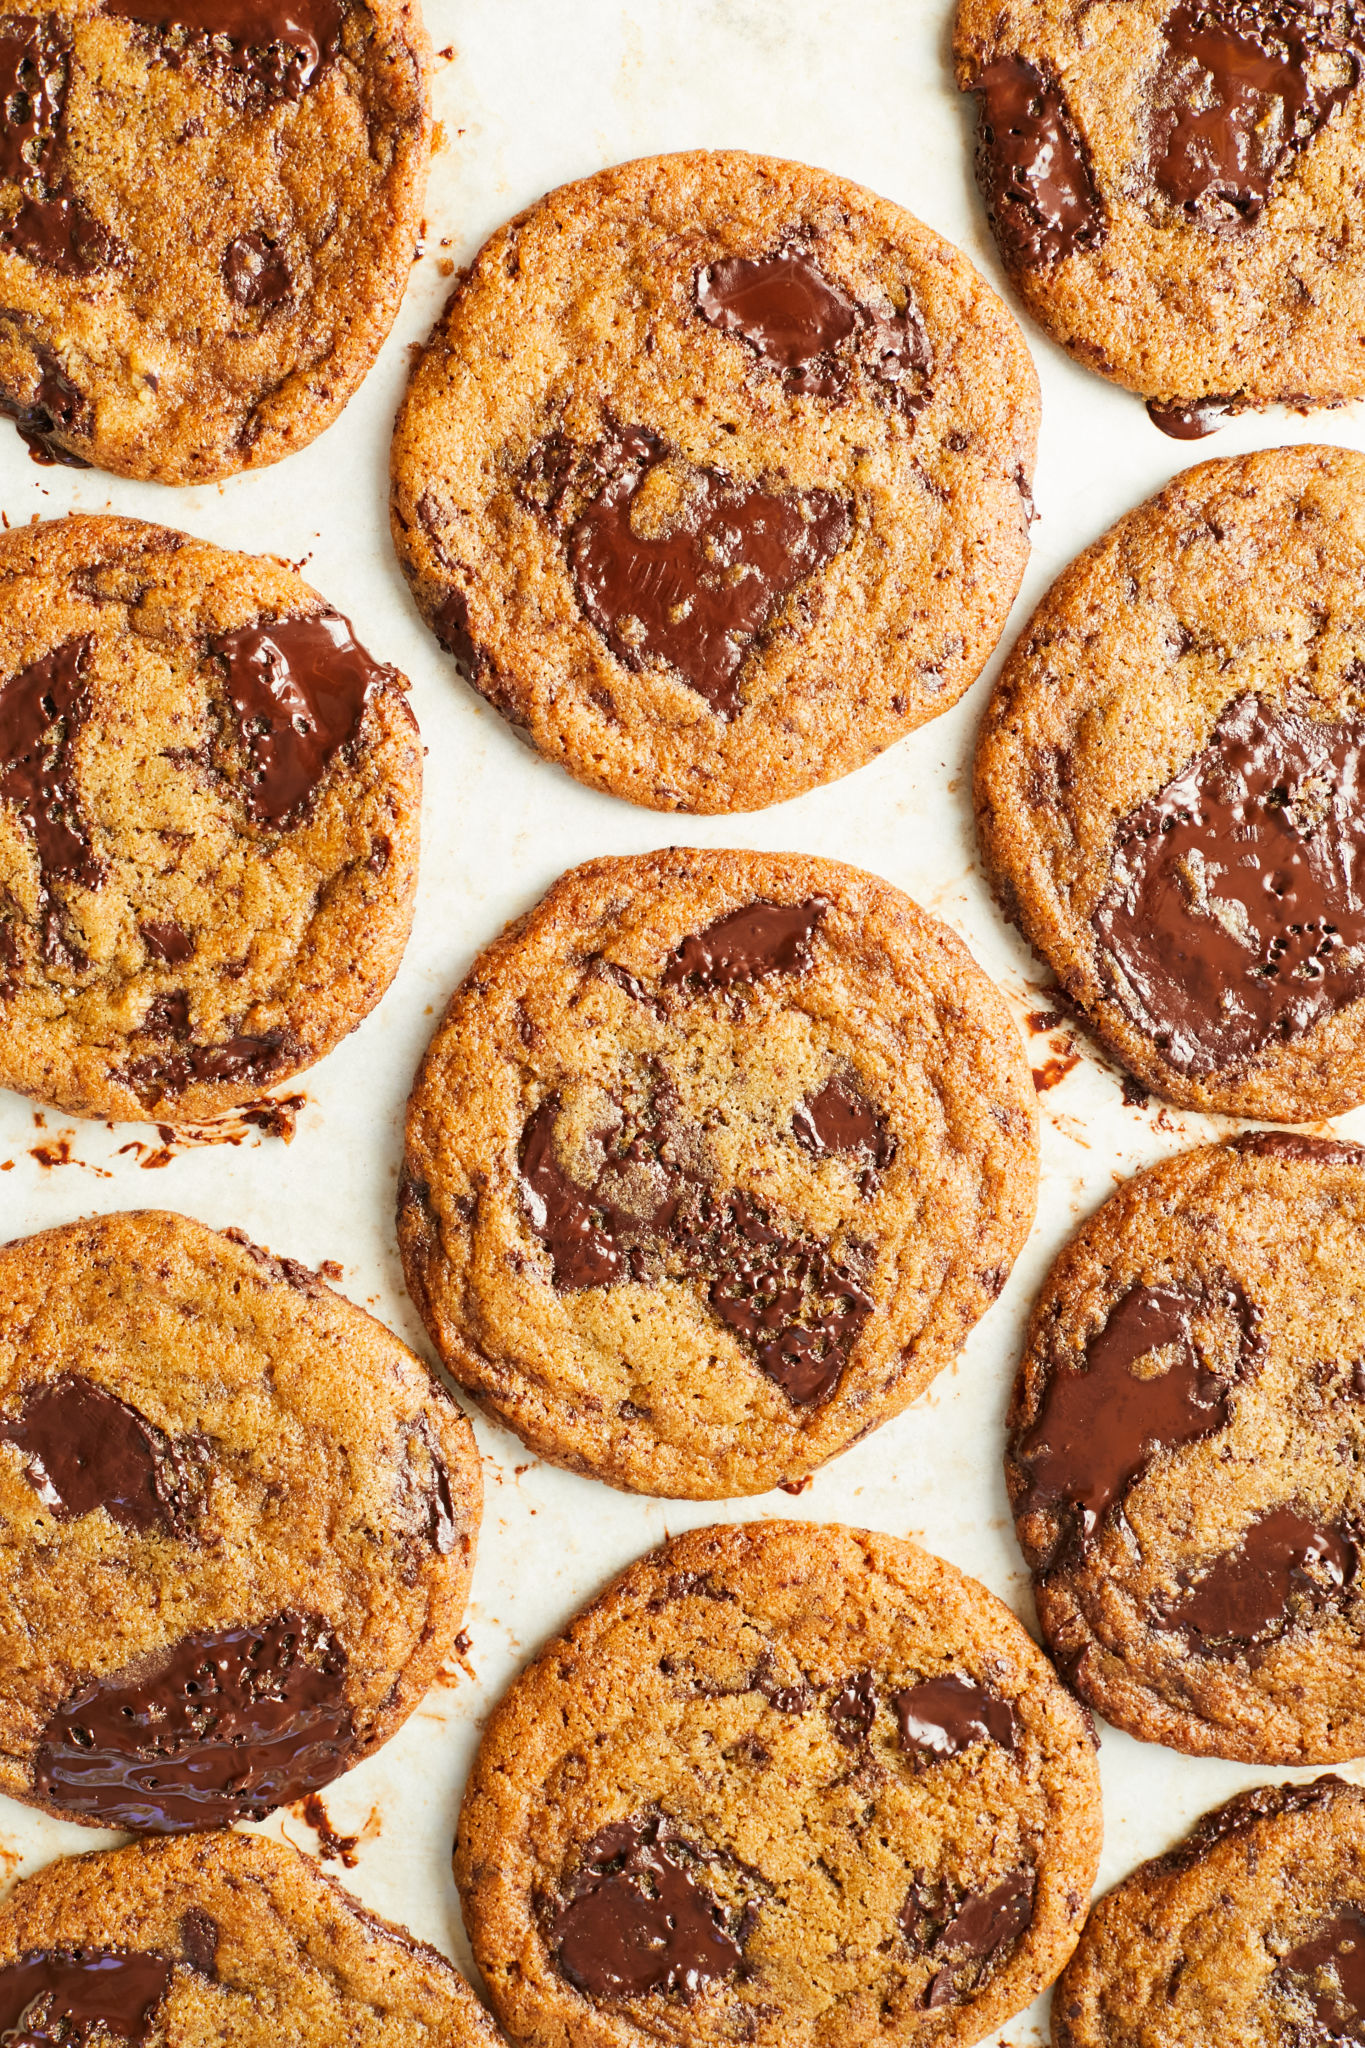 A tray of the internet's best chewy chocolate chip cookies, with melted chocolate chunks.